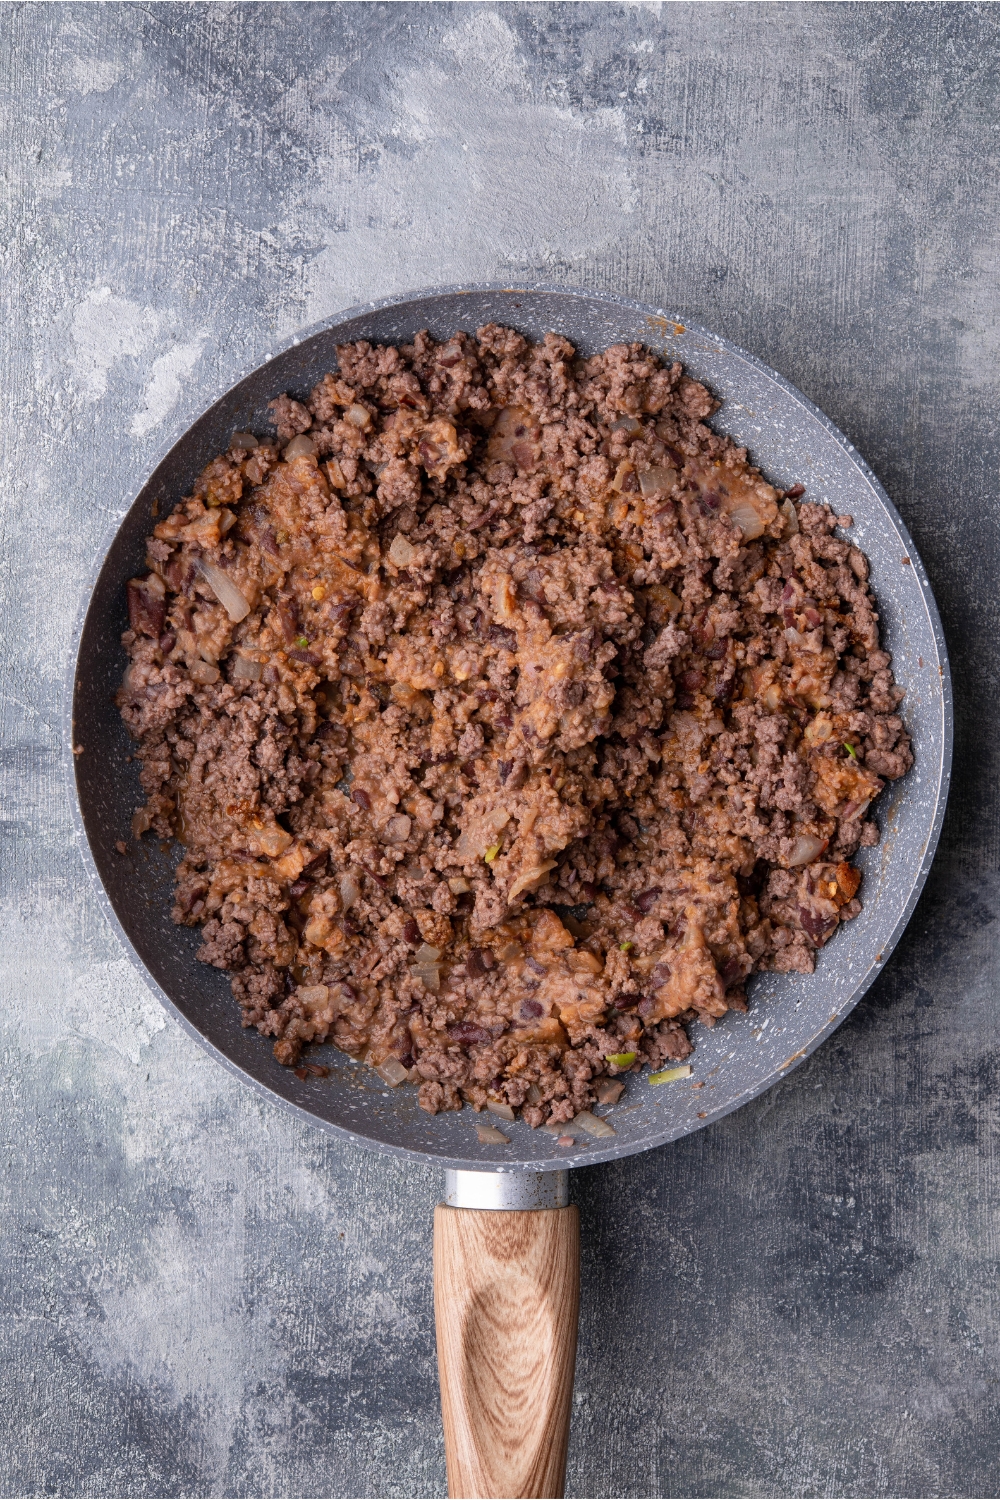 Skillet filled with seasoned ground beef and refried beans.